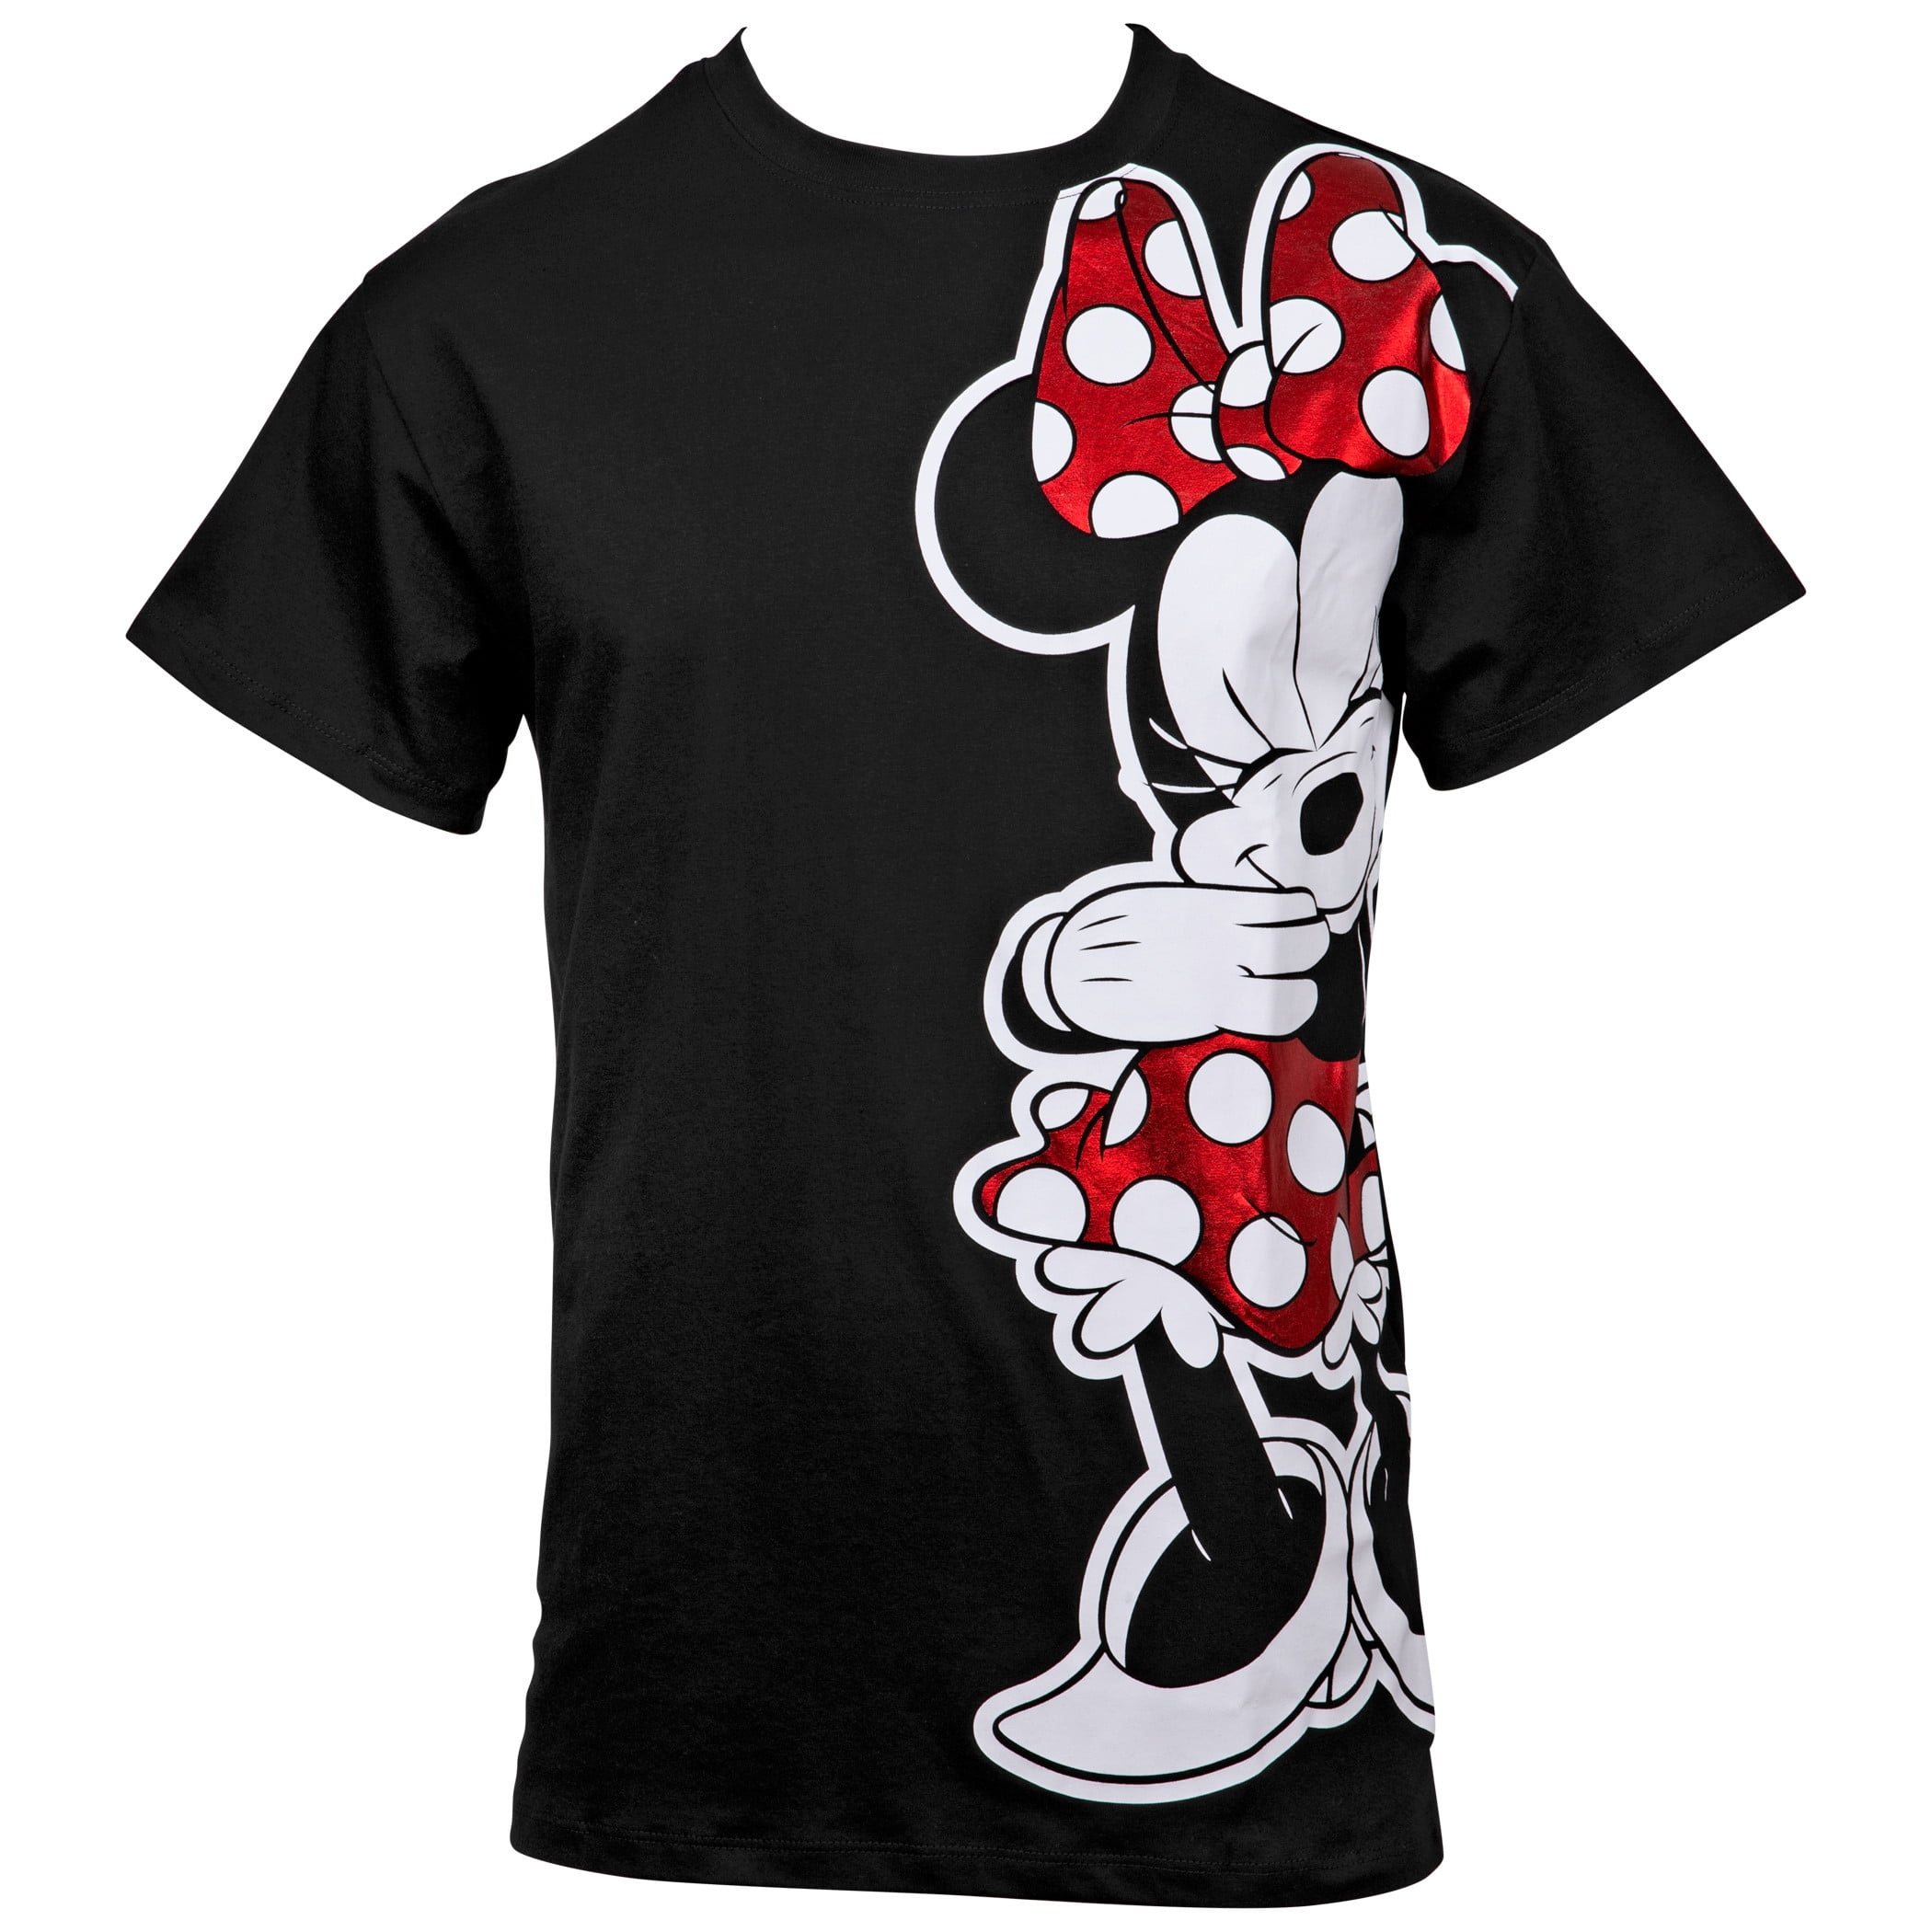 Disney Minnie Mouse Shy Expression Pose T-Shirt-Small